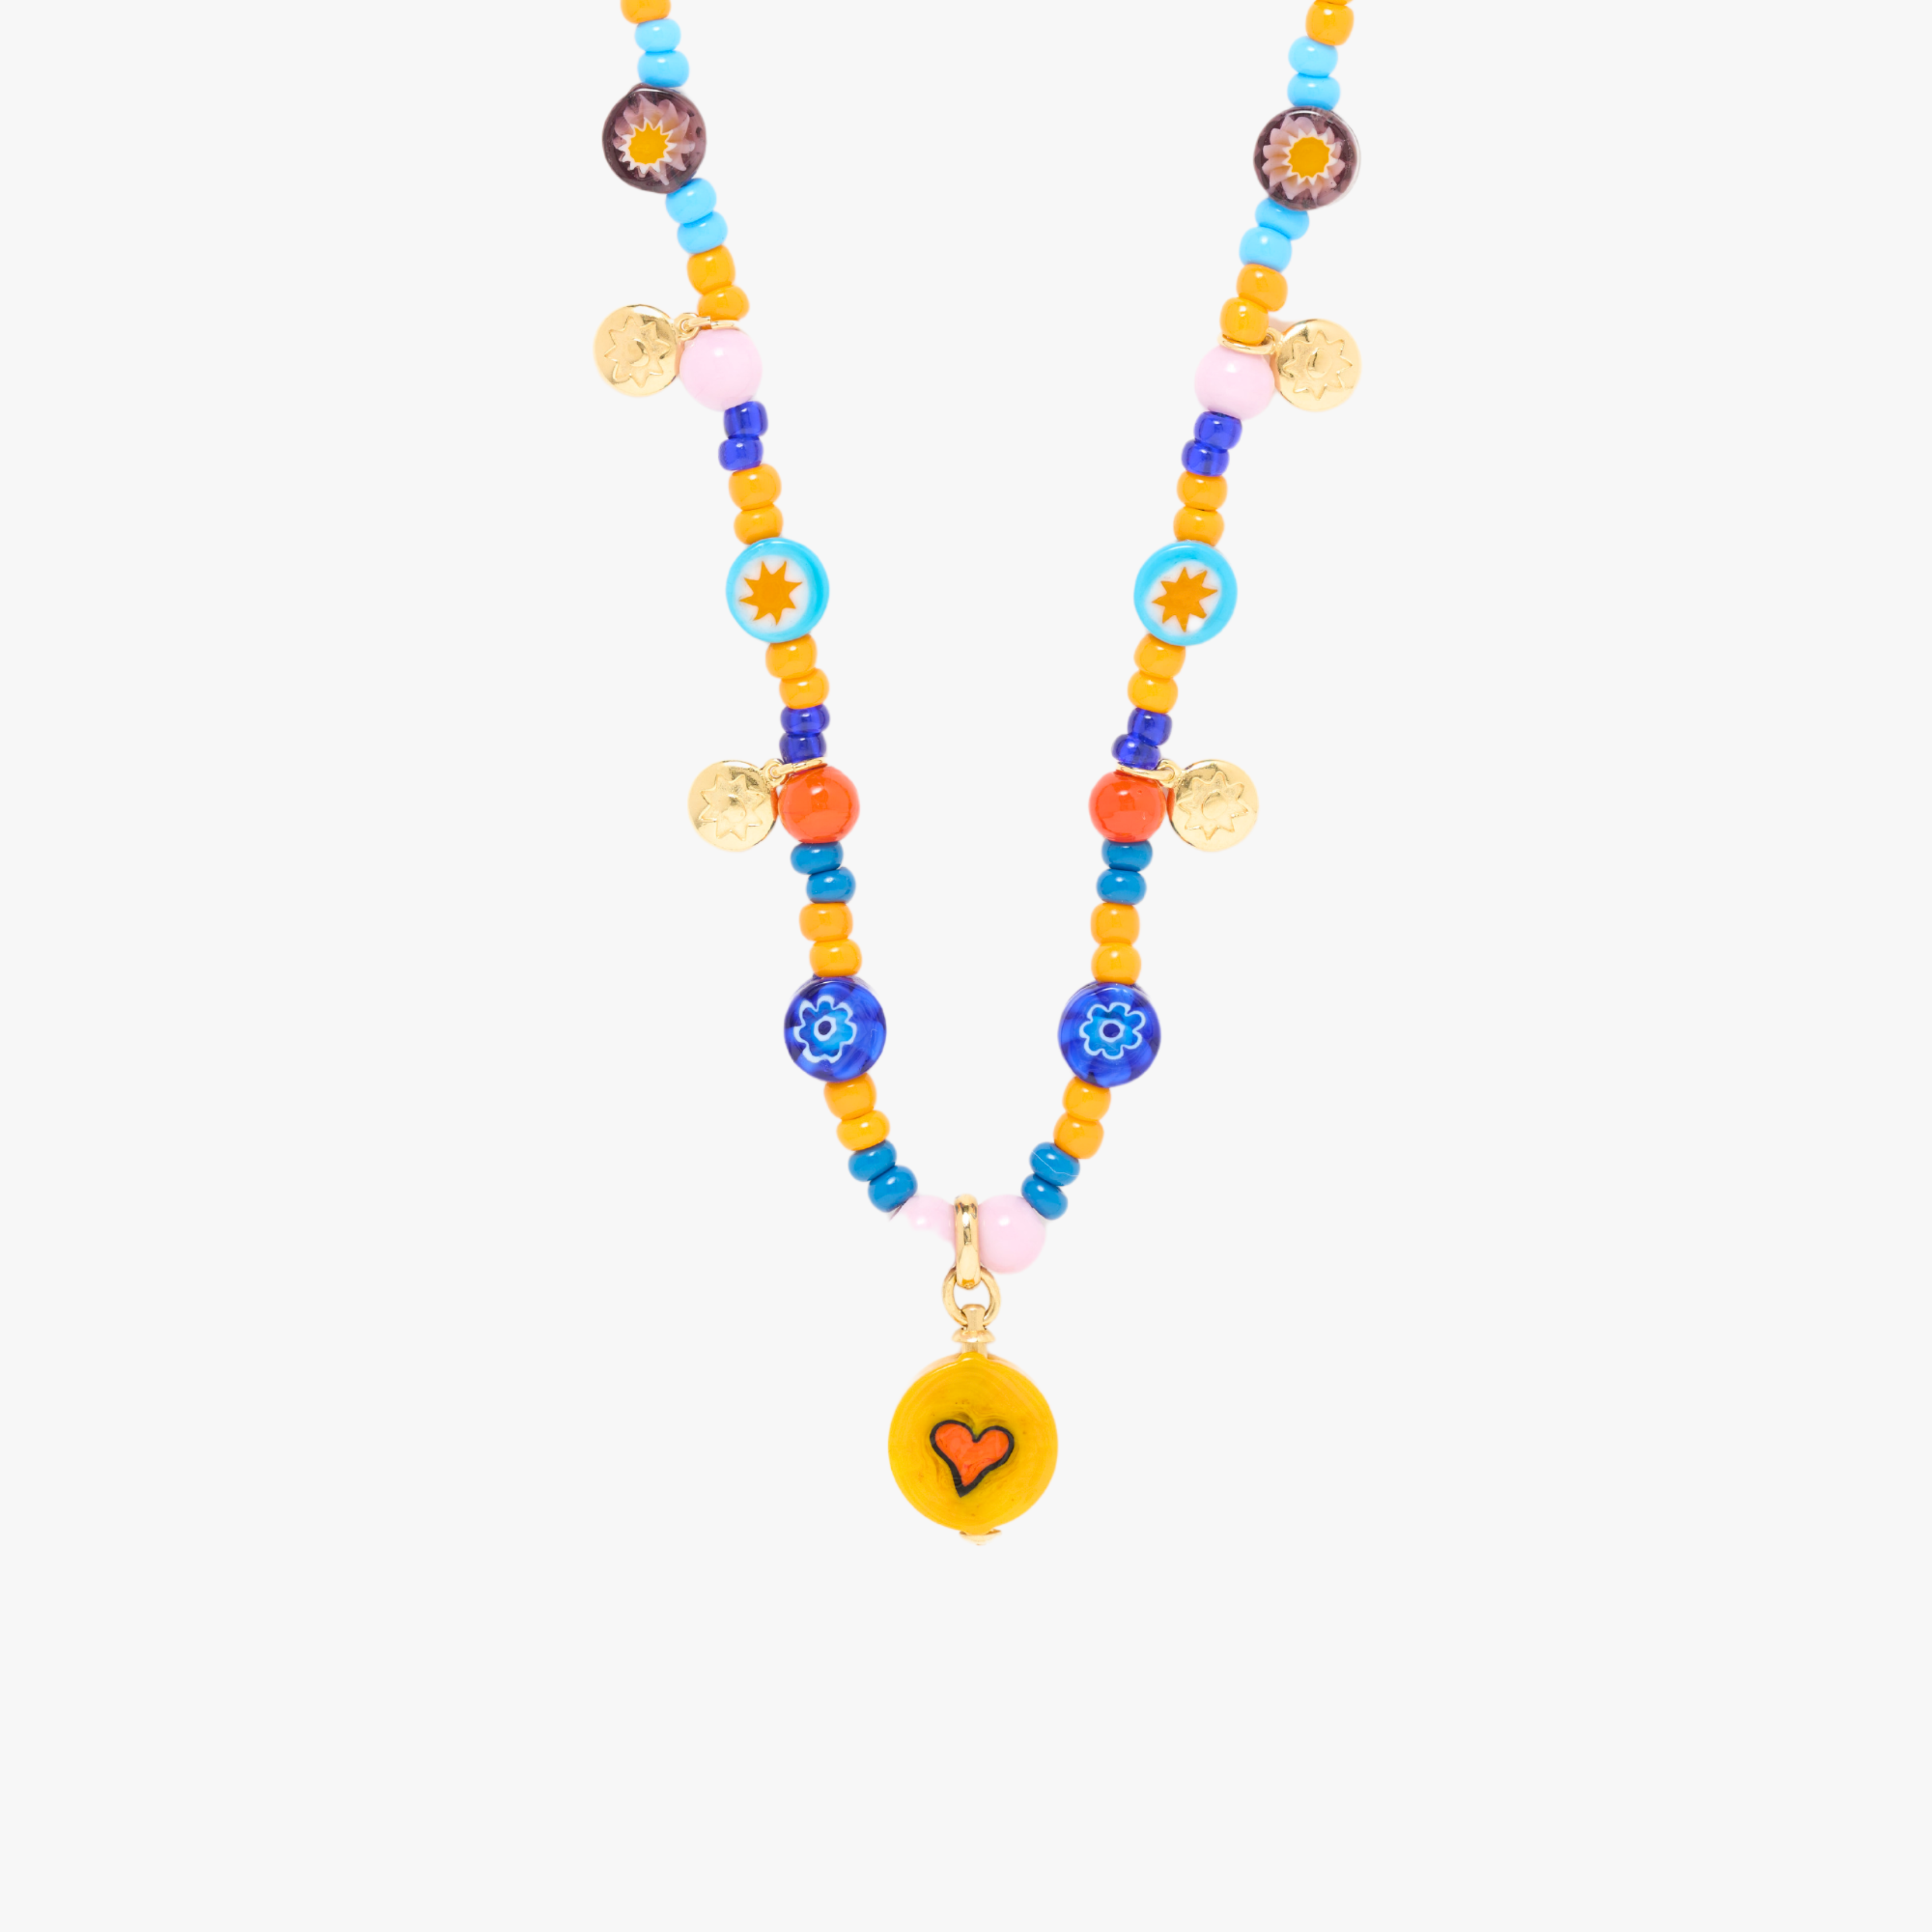 CARNEVALE NECKLACE - Yellow Heart